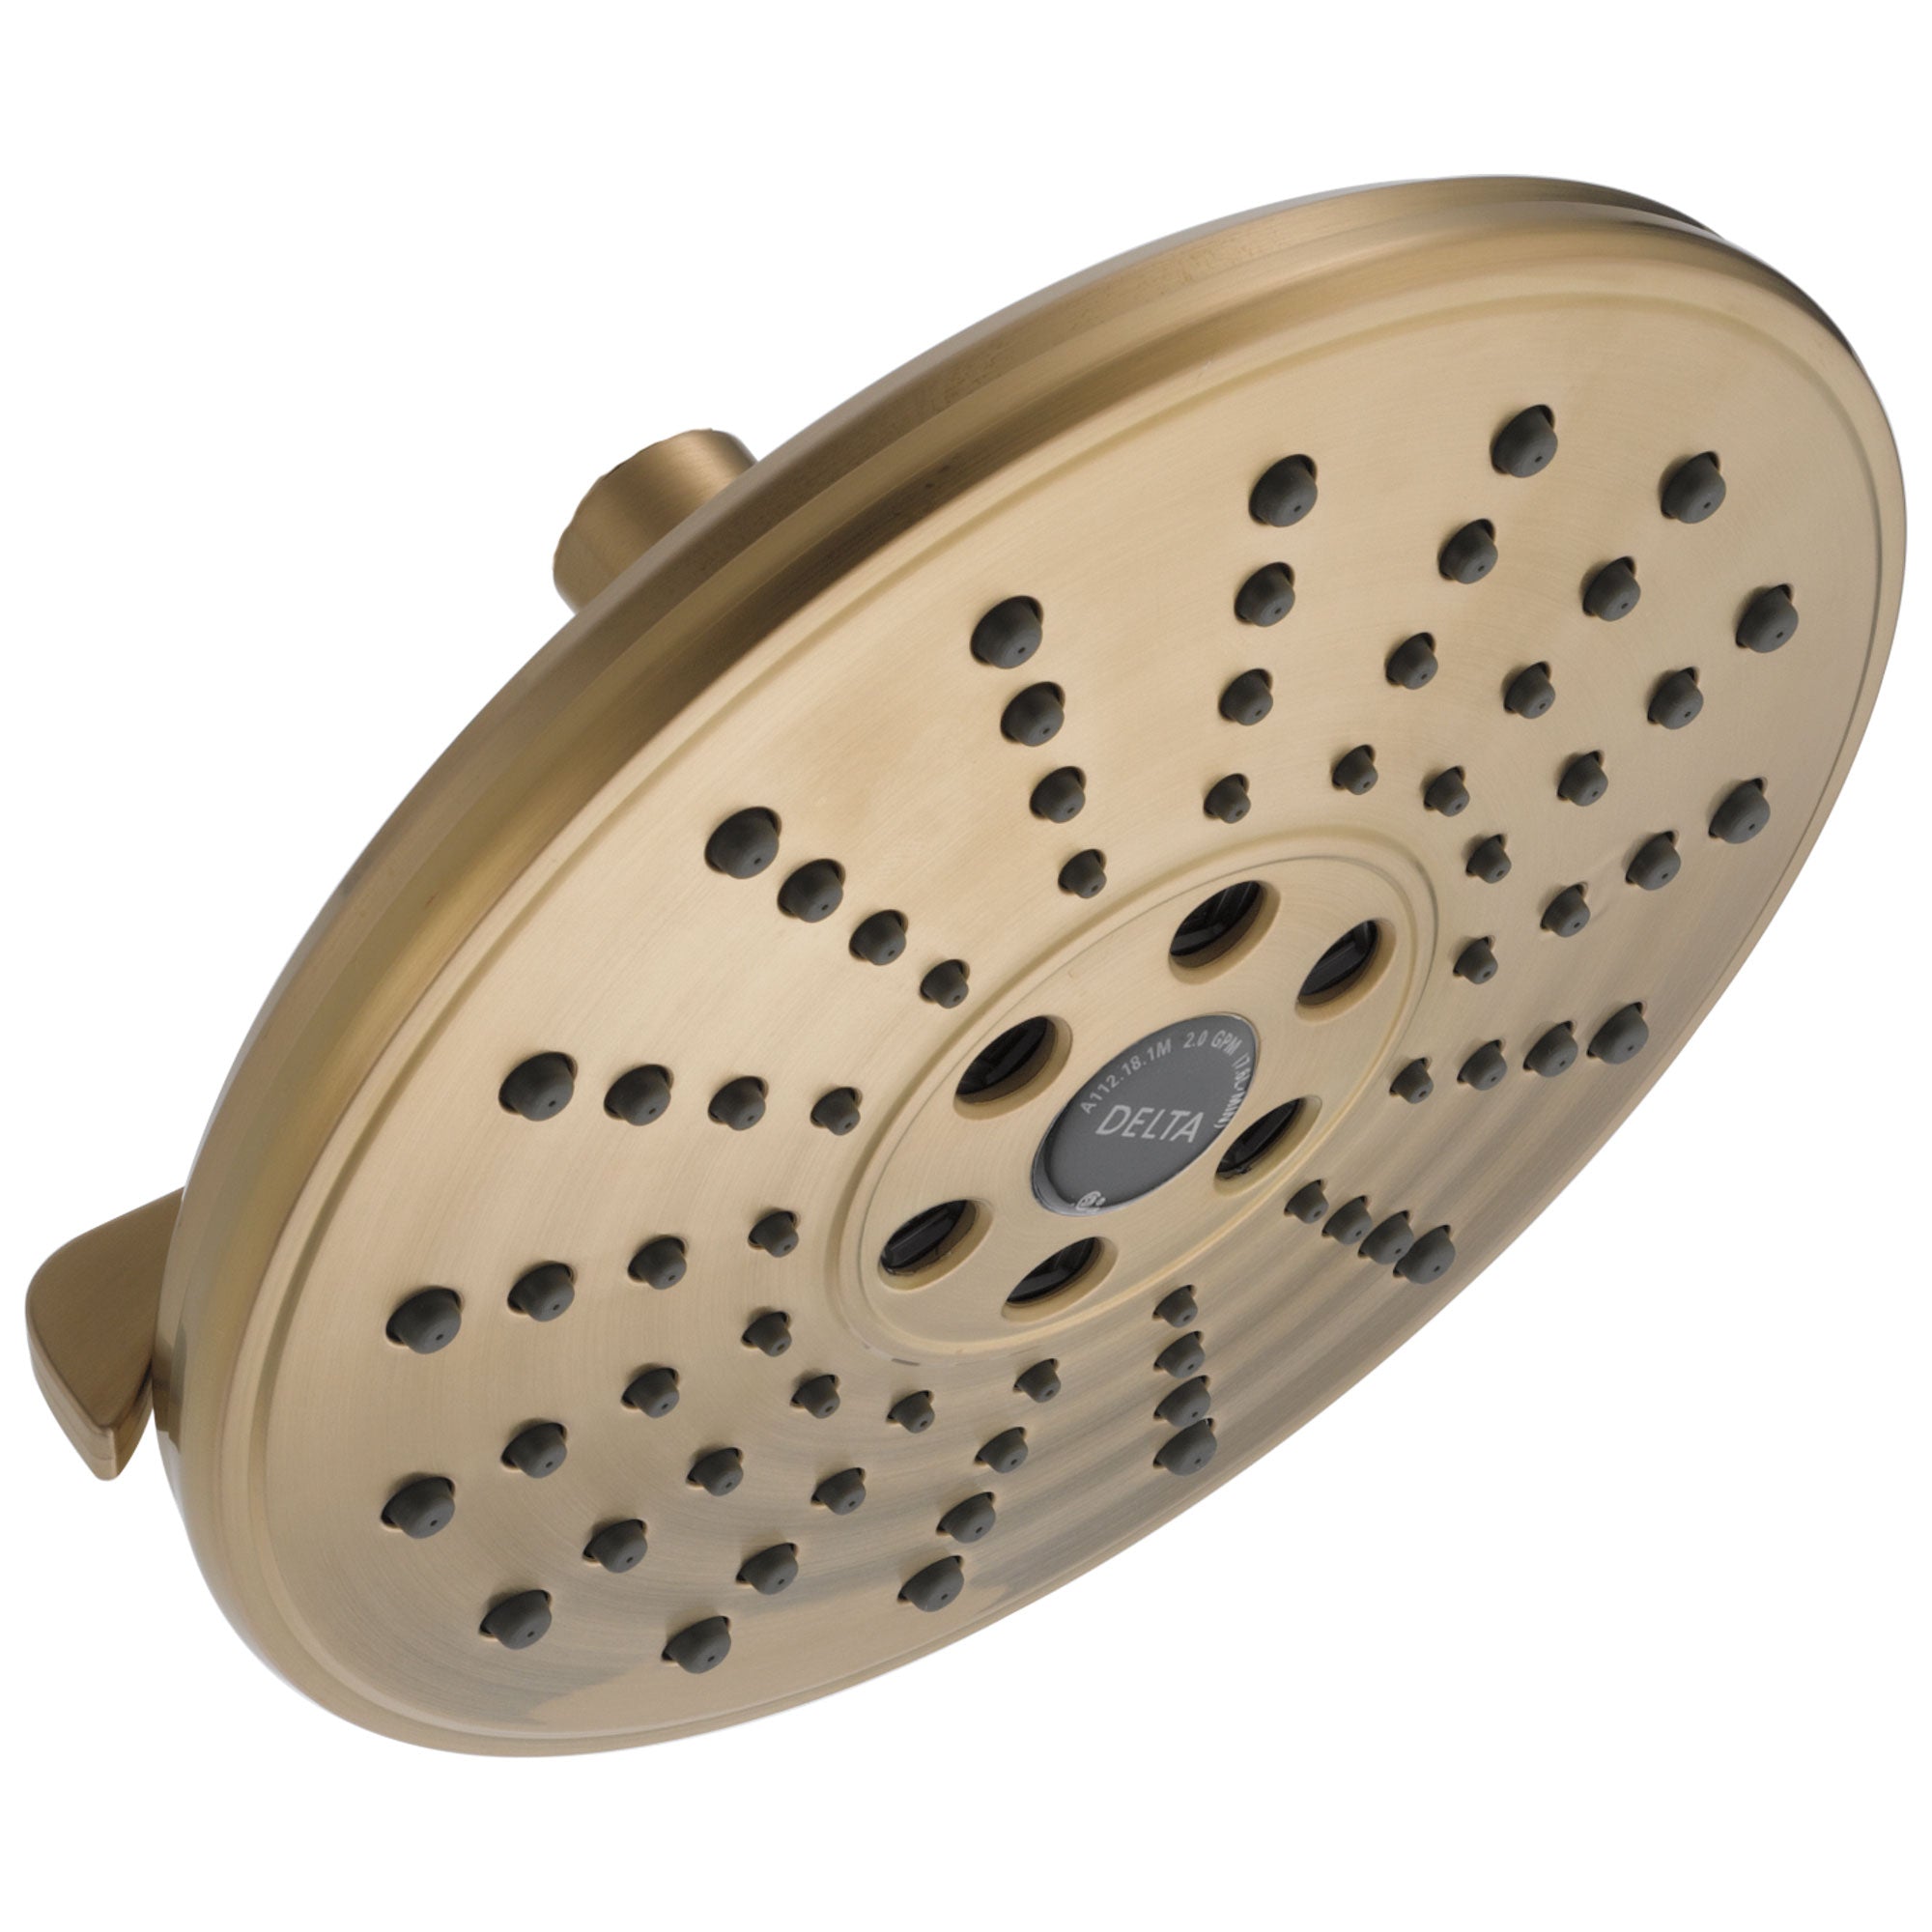 Delta Universal Showering Components Collection Champagne Bronze Finish H2Okinetic 3-Setting Raincan Shower Head D52688CZ